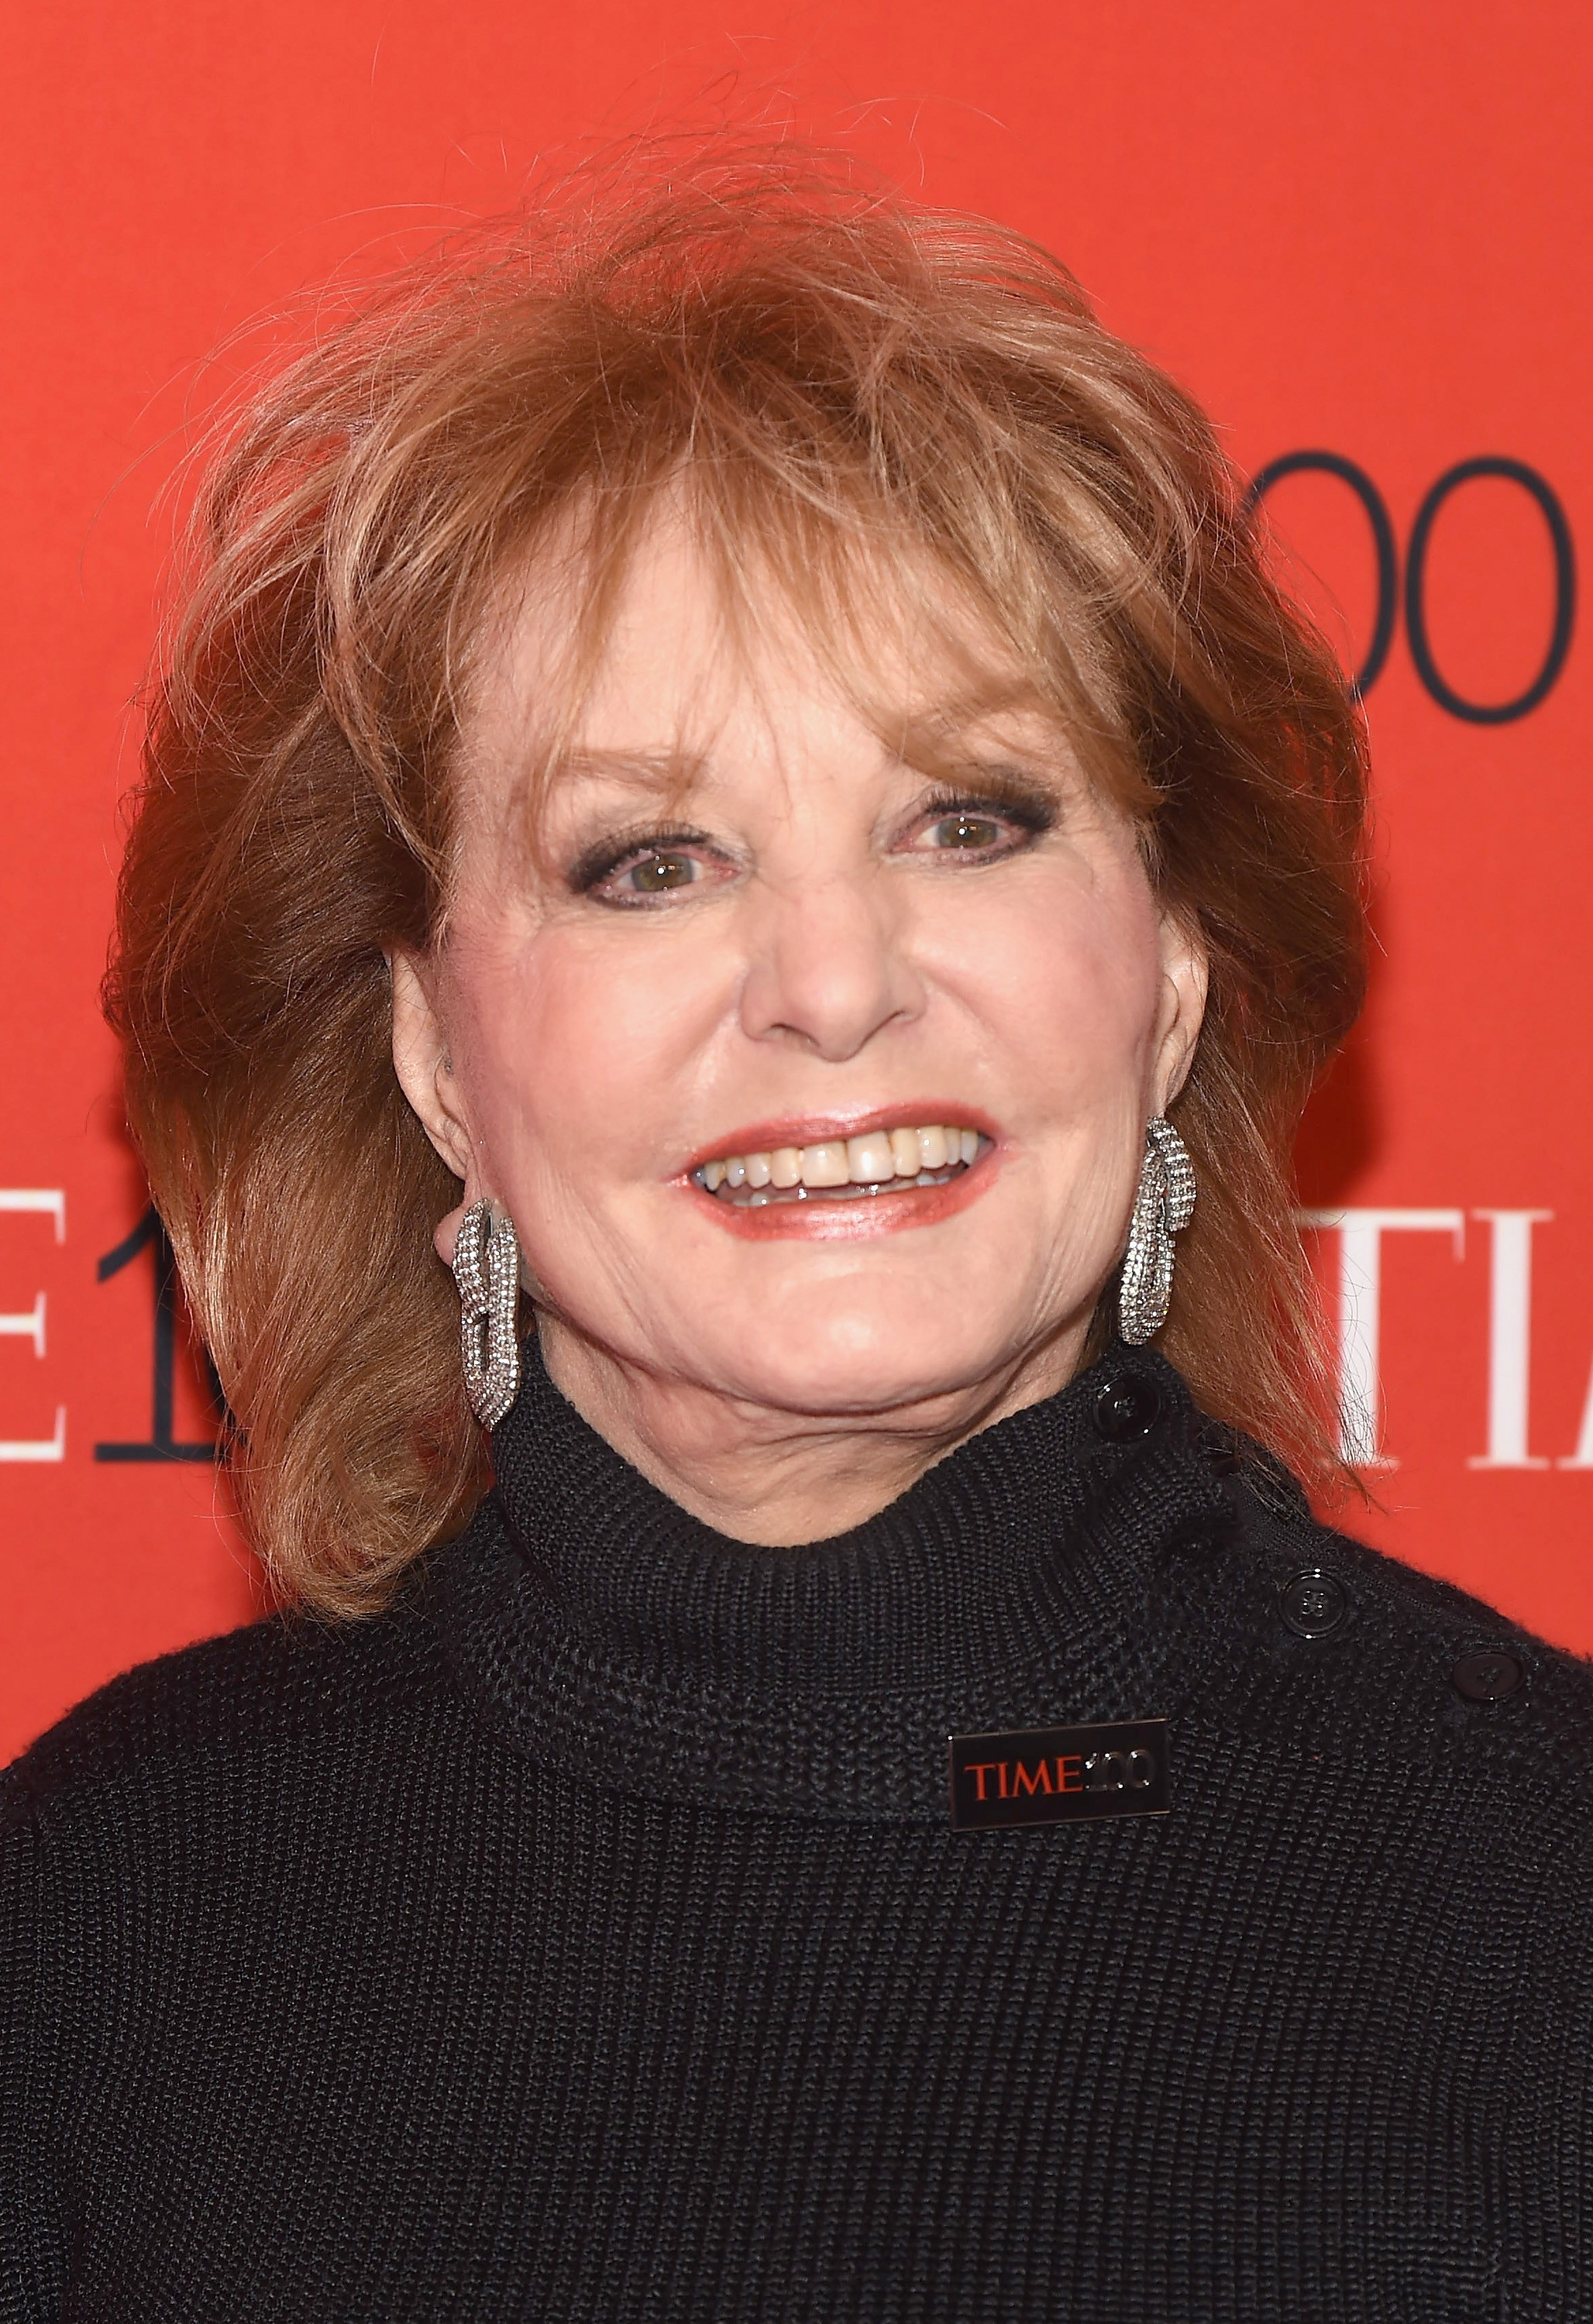 Barbara Walters at TIME 100 Gala in New York City on April 21, 2015.